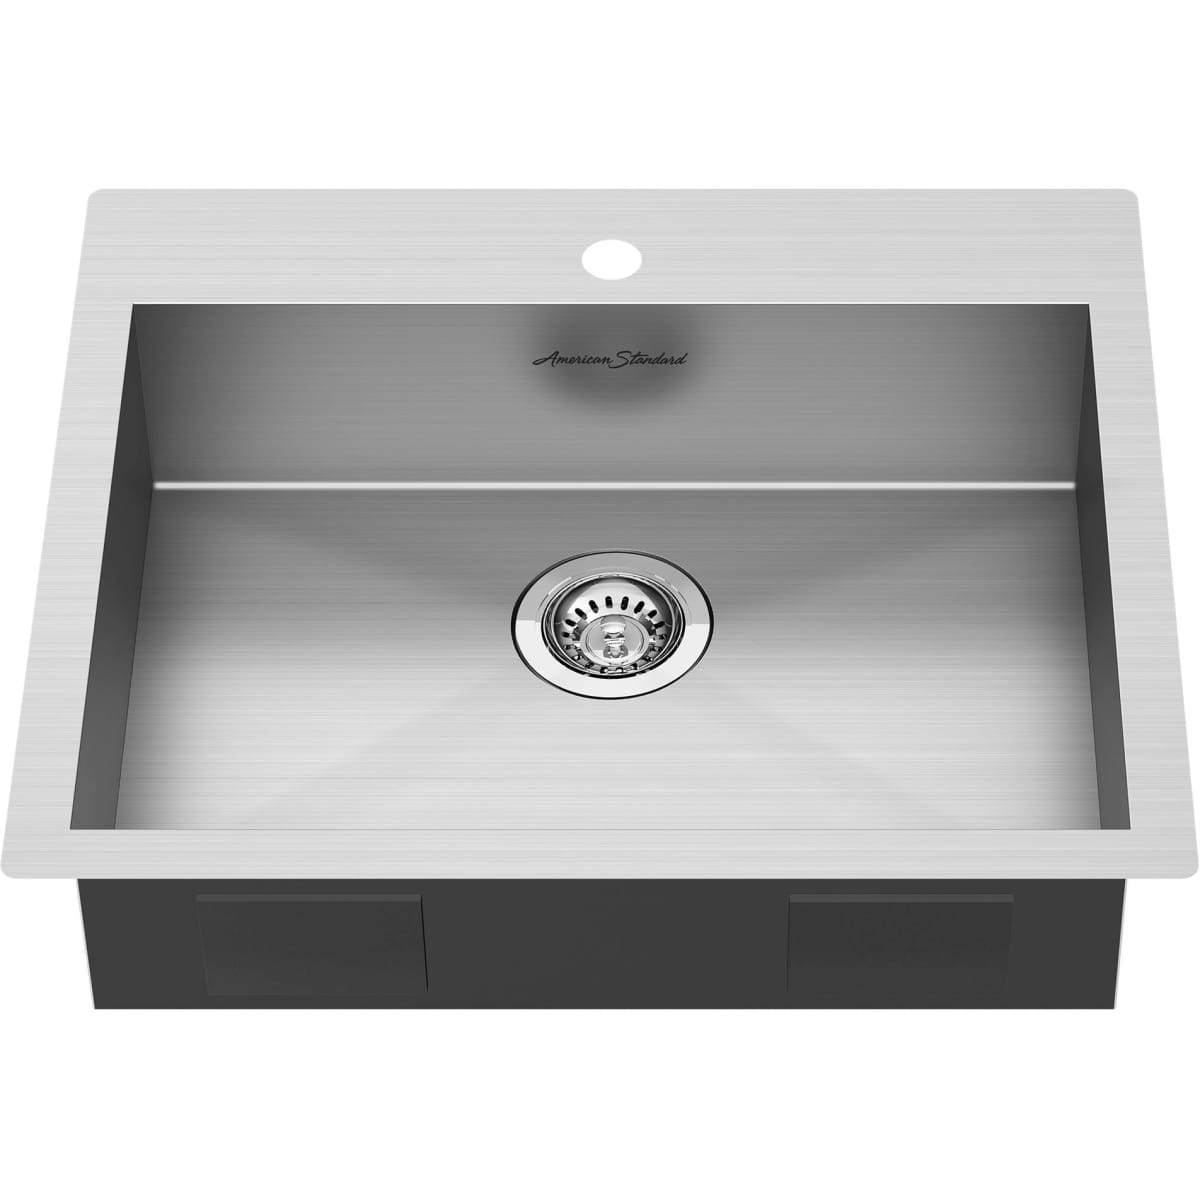 Empire Ceramic Kitchen Sink with Integrated Waterfall and Pull-down Faucet  Set/304 Grade Stainless Steel Sink with Cup washer and Drain Baskets